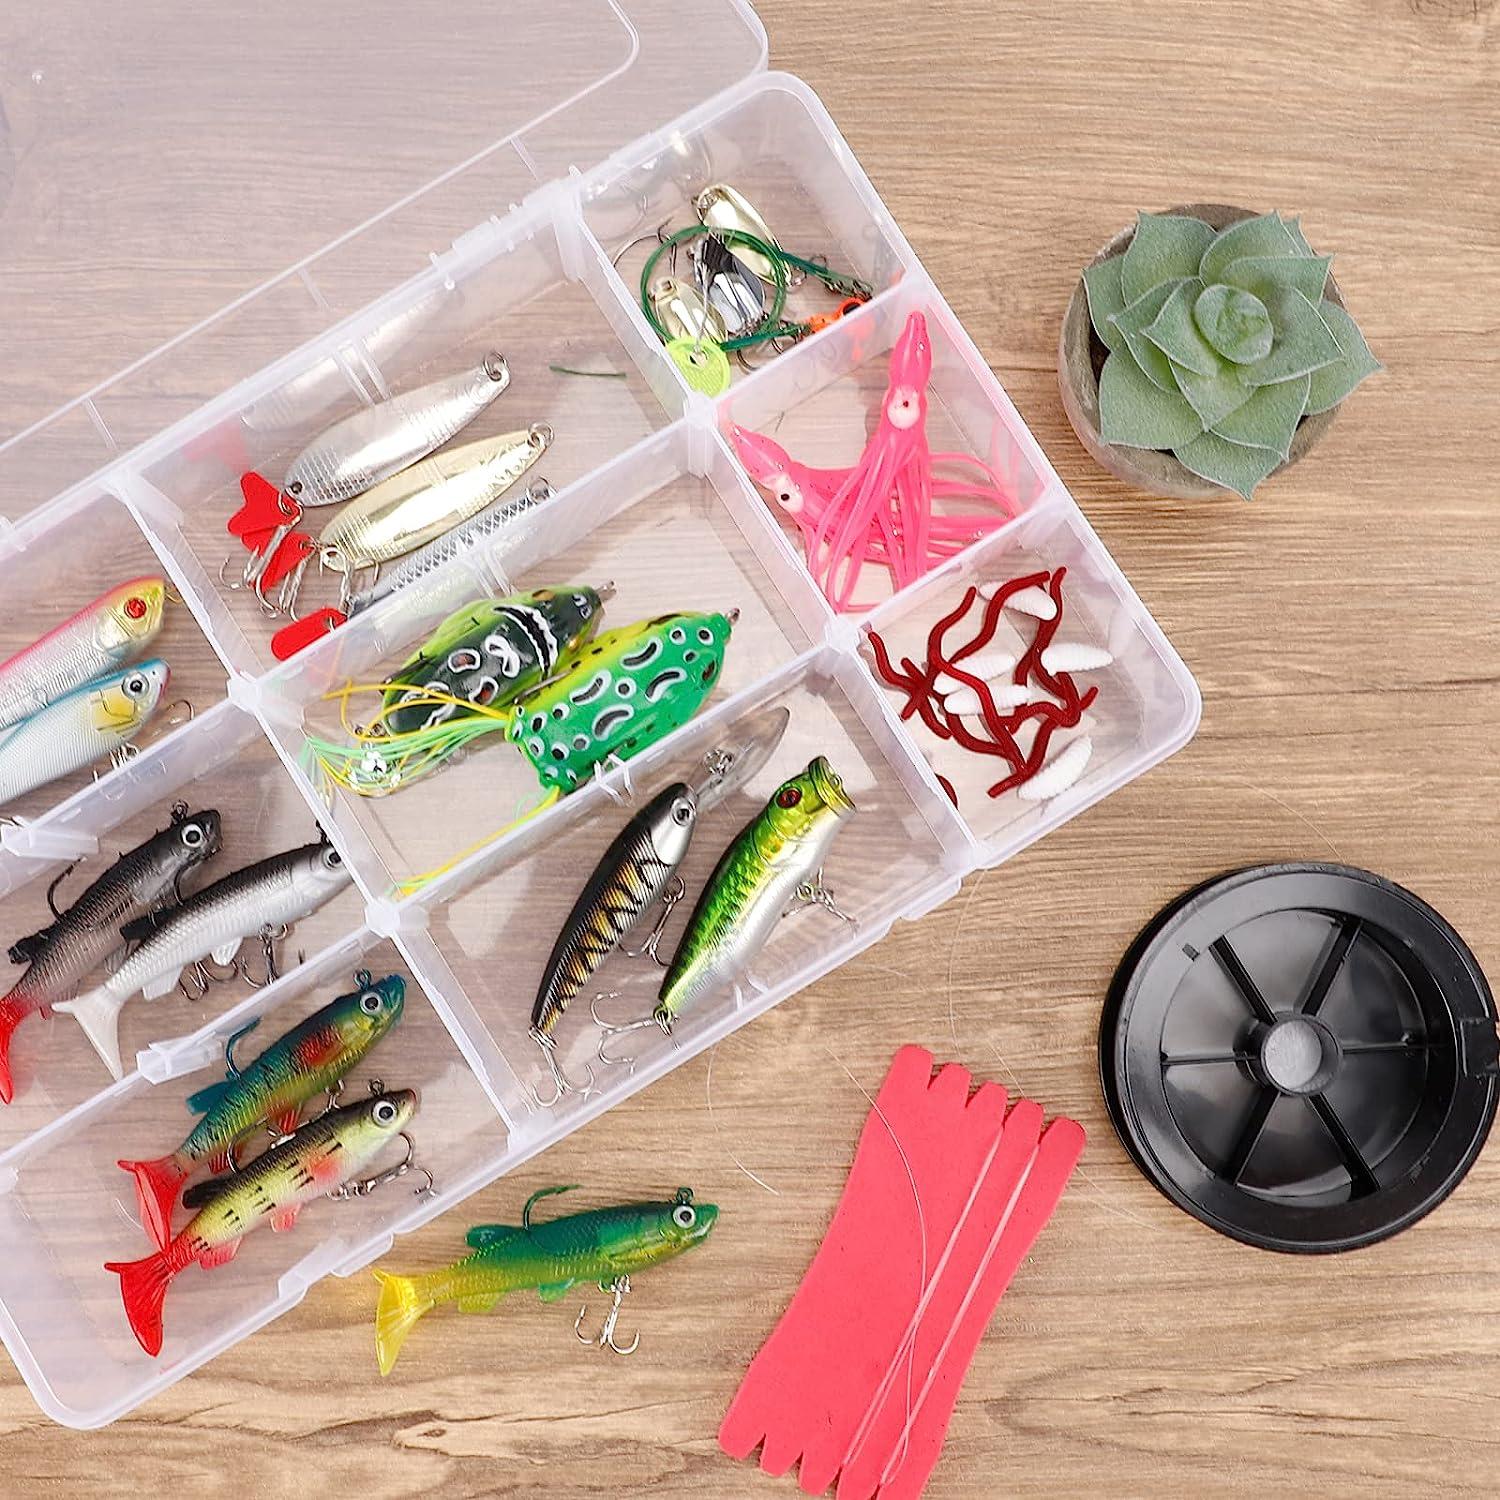 SGHUO 3 Pack Plastic Organizer Box 36 Grids, Craft Organizer Storage with  Adjustable Dividers, Bead Organizer, Fishing Tackles Box, Jewelry Box with